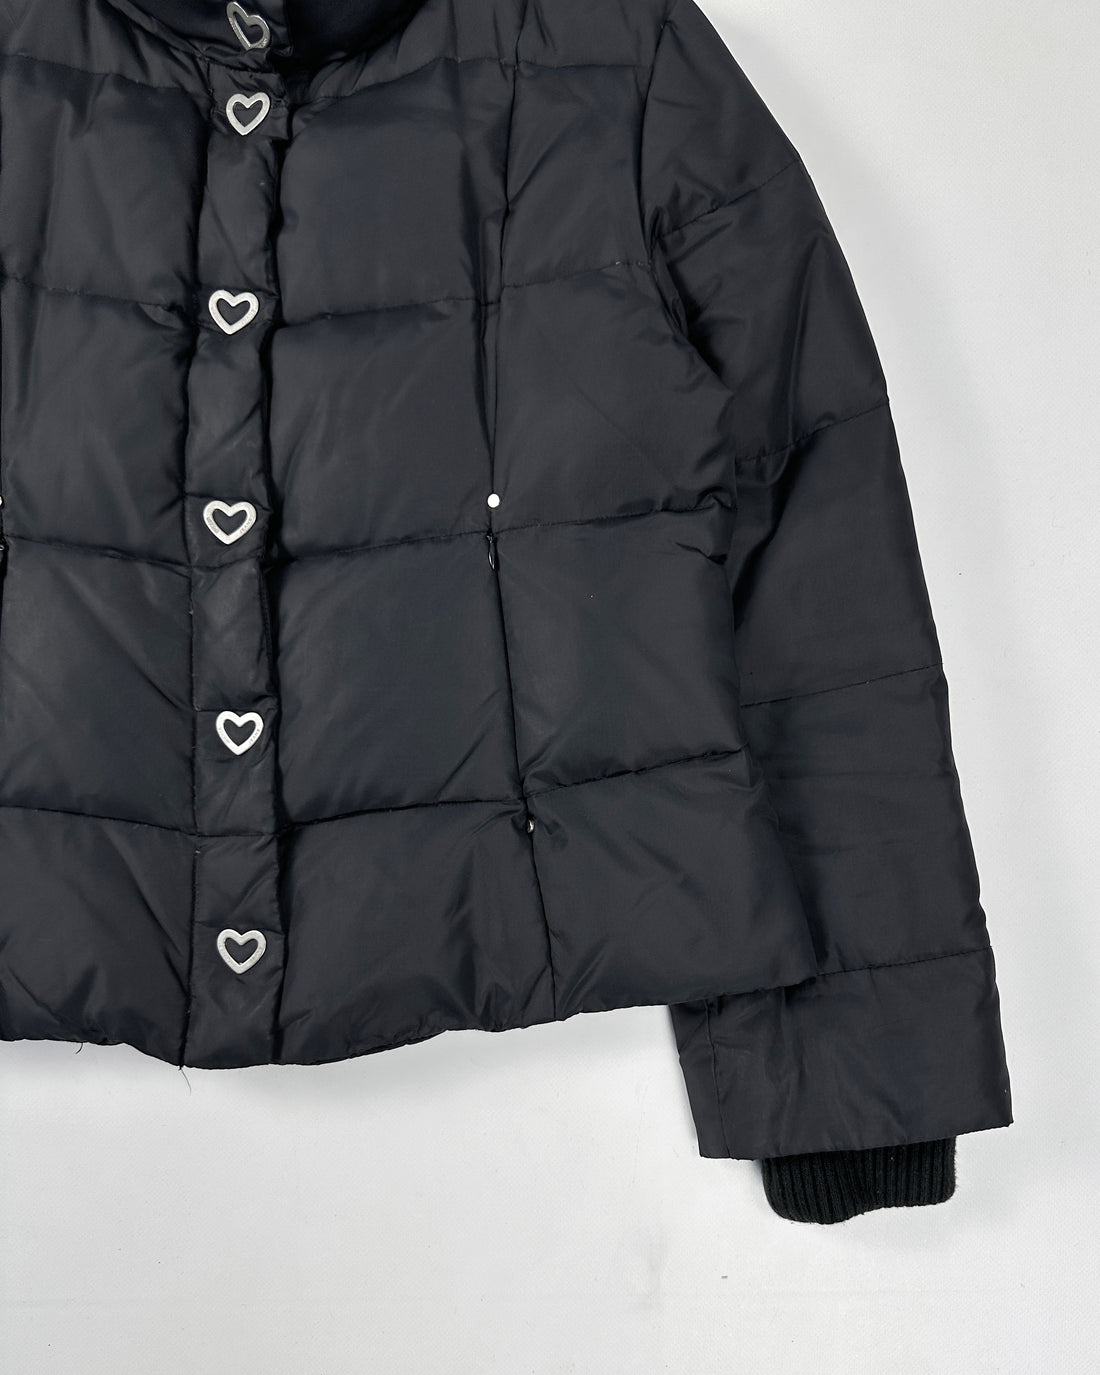 Moschino Silver Hearts Black Puffer Jacket 2000's